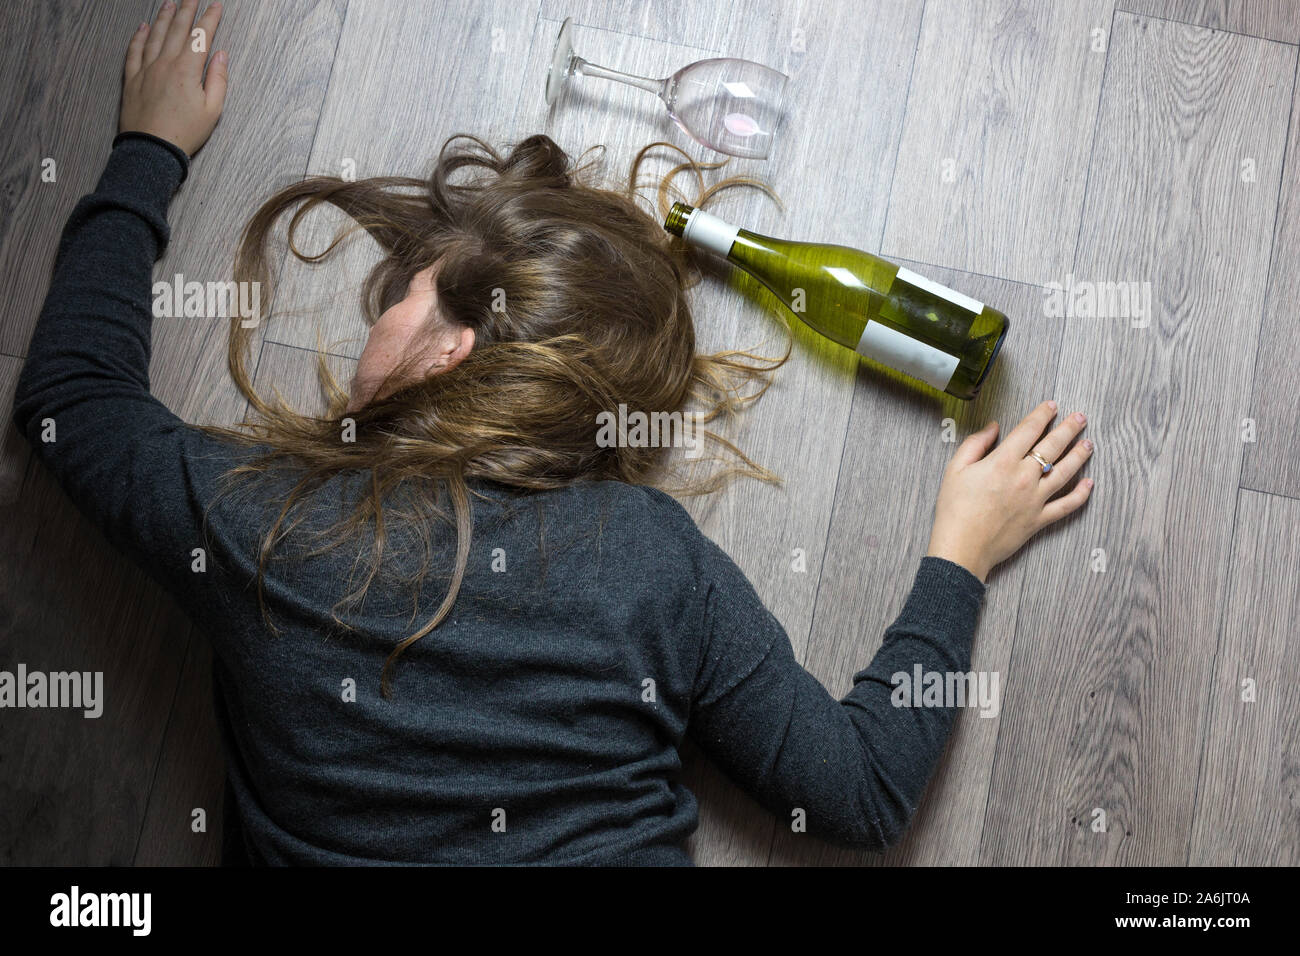 Girl With A Bad Appearance, In A Bra And Mask For Sleeping, Holds A Bottle  Of Alcohol And Looks At It. Stock Photo, Picture and Royalty Free Image.  Image 92392163.